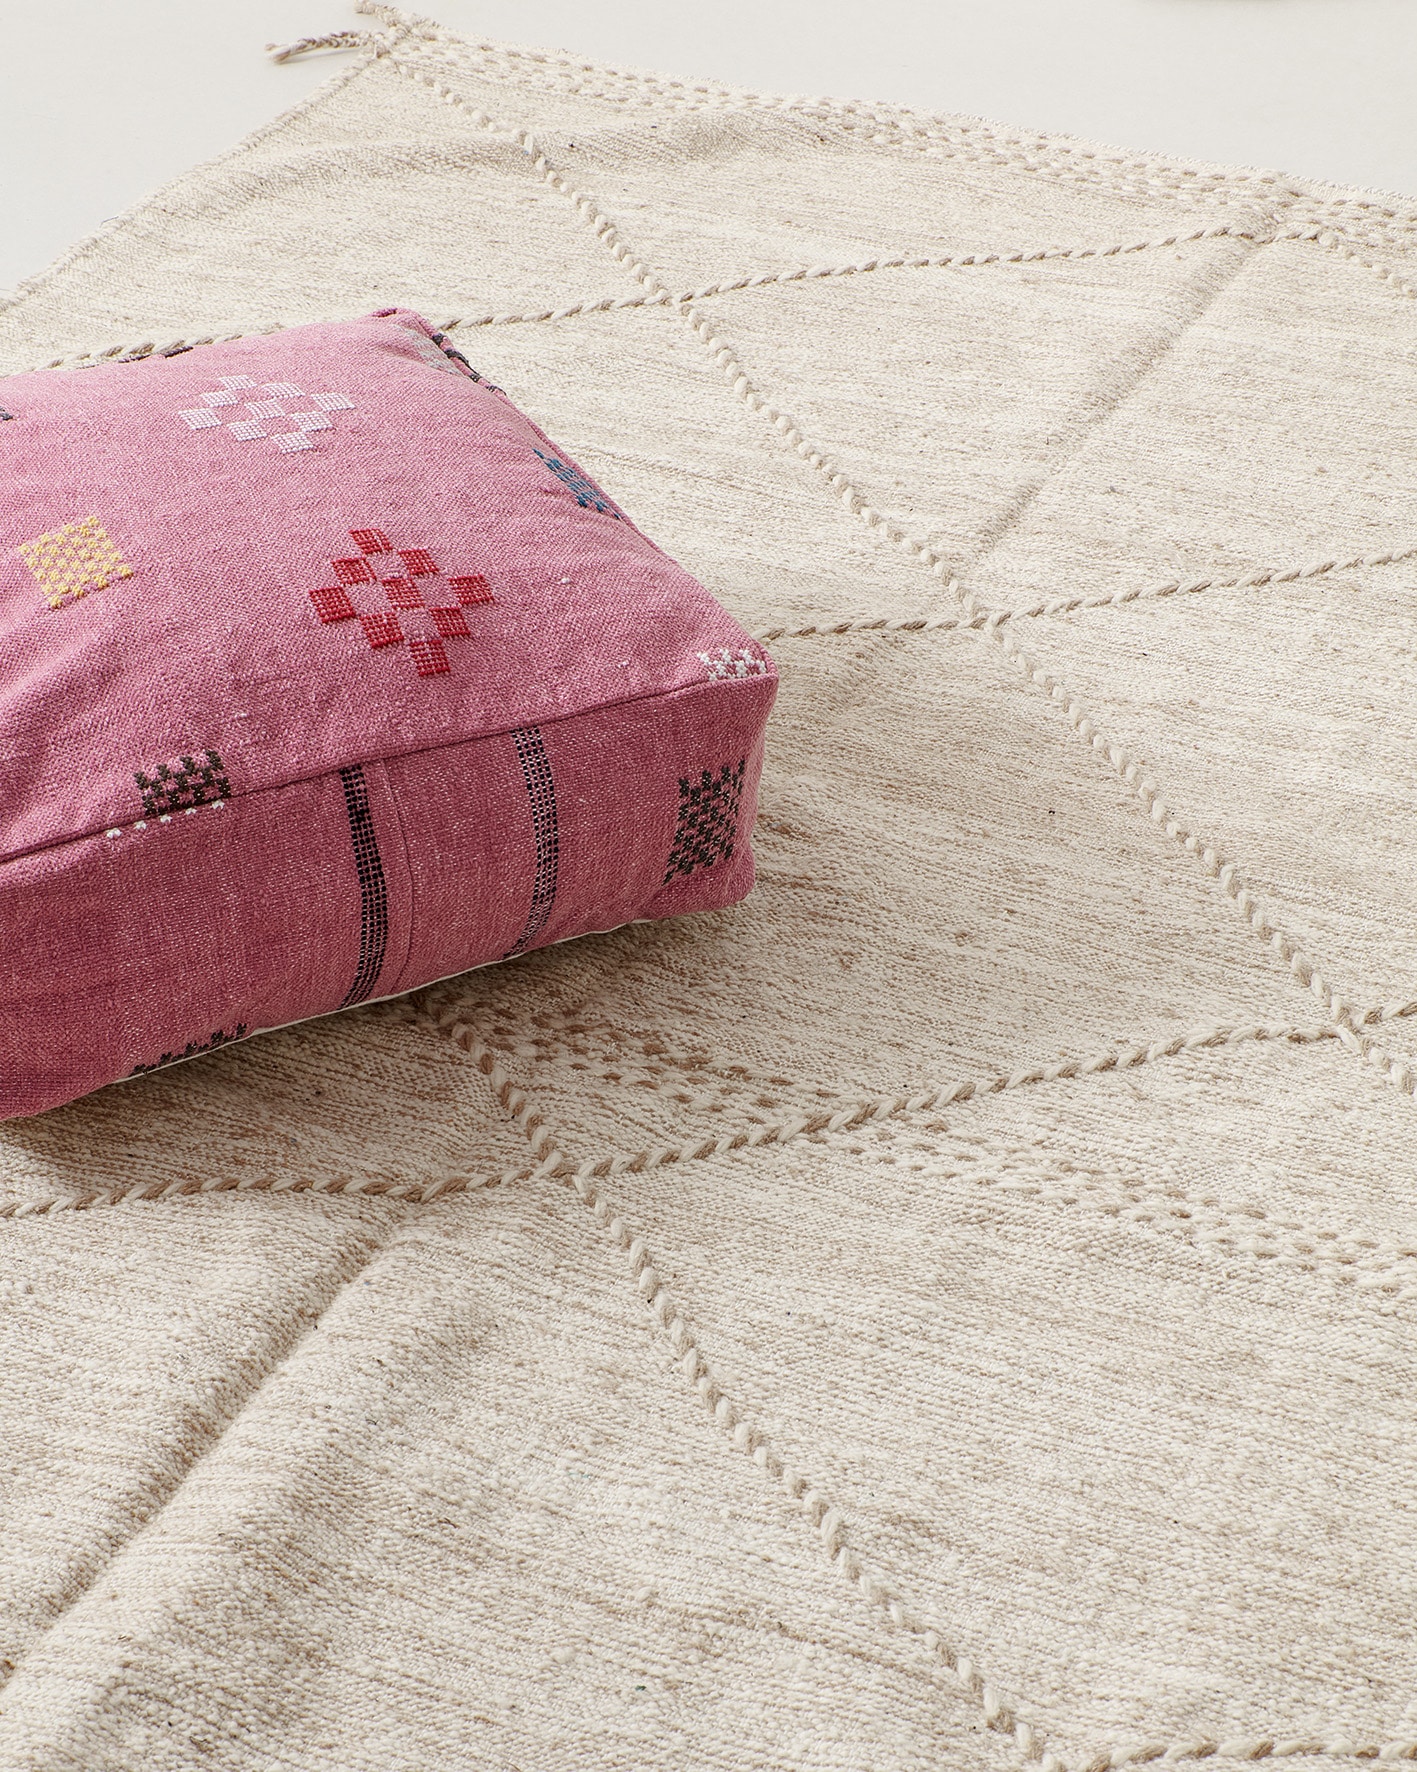 Pink pouf with colourful pictograms, mood